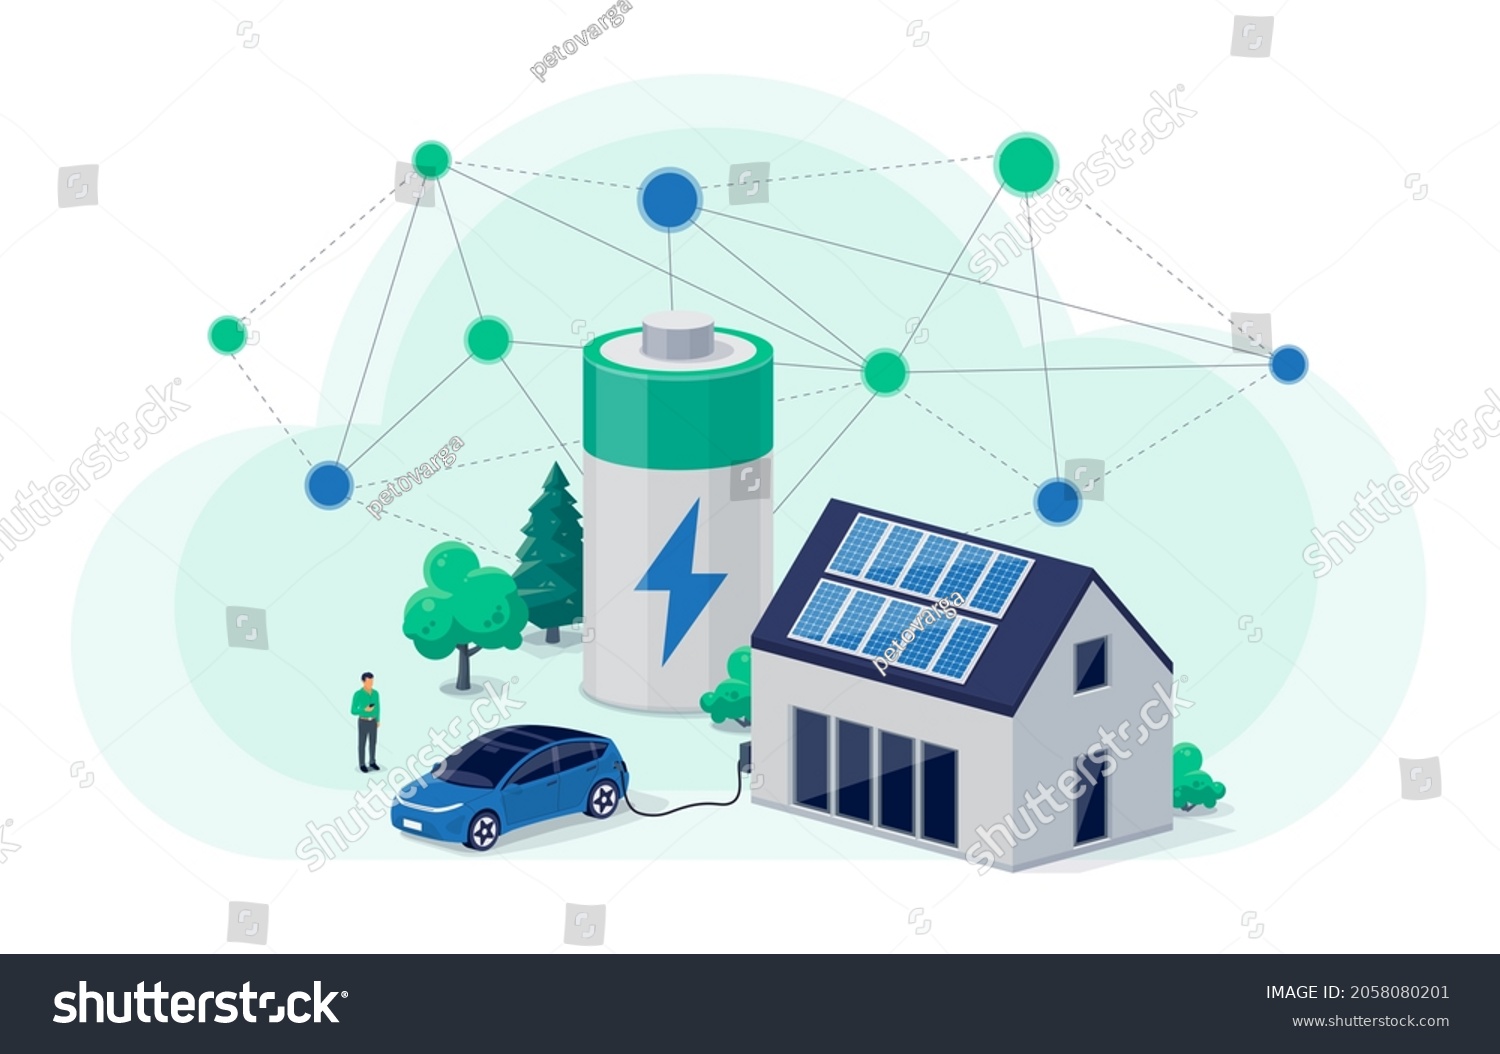 Home Virtual Battery Energy Storage House Stock Vector (Royalty Free ...